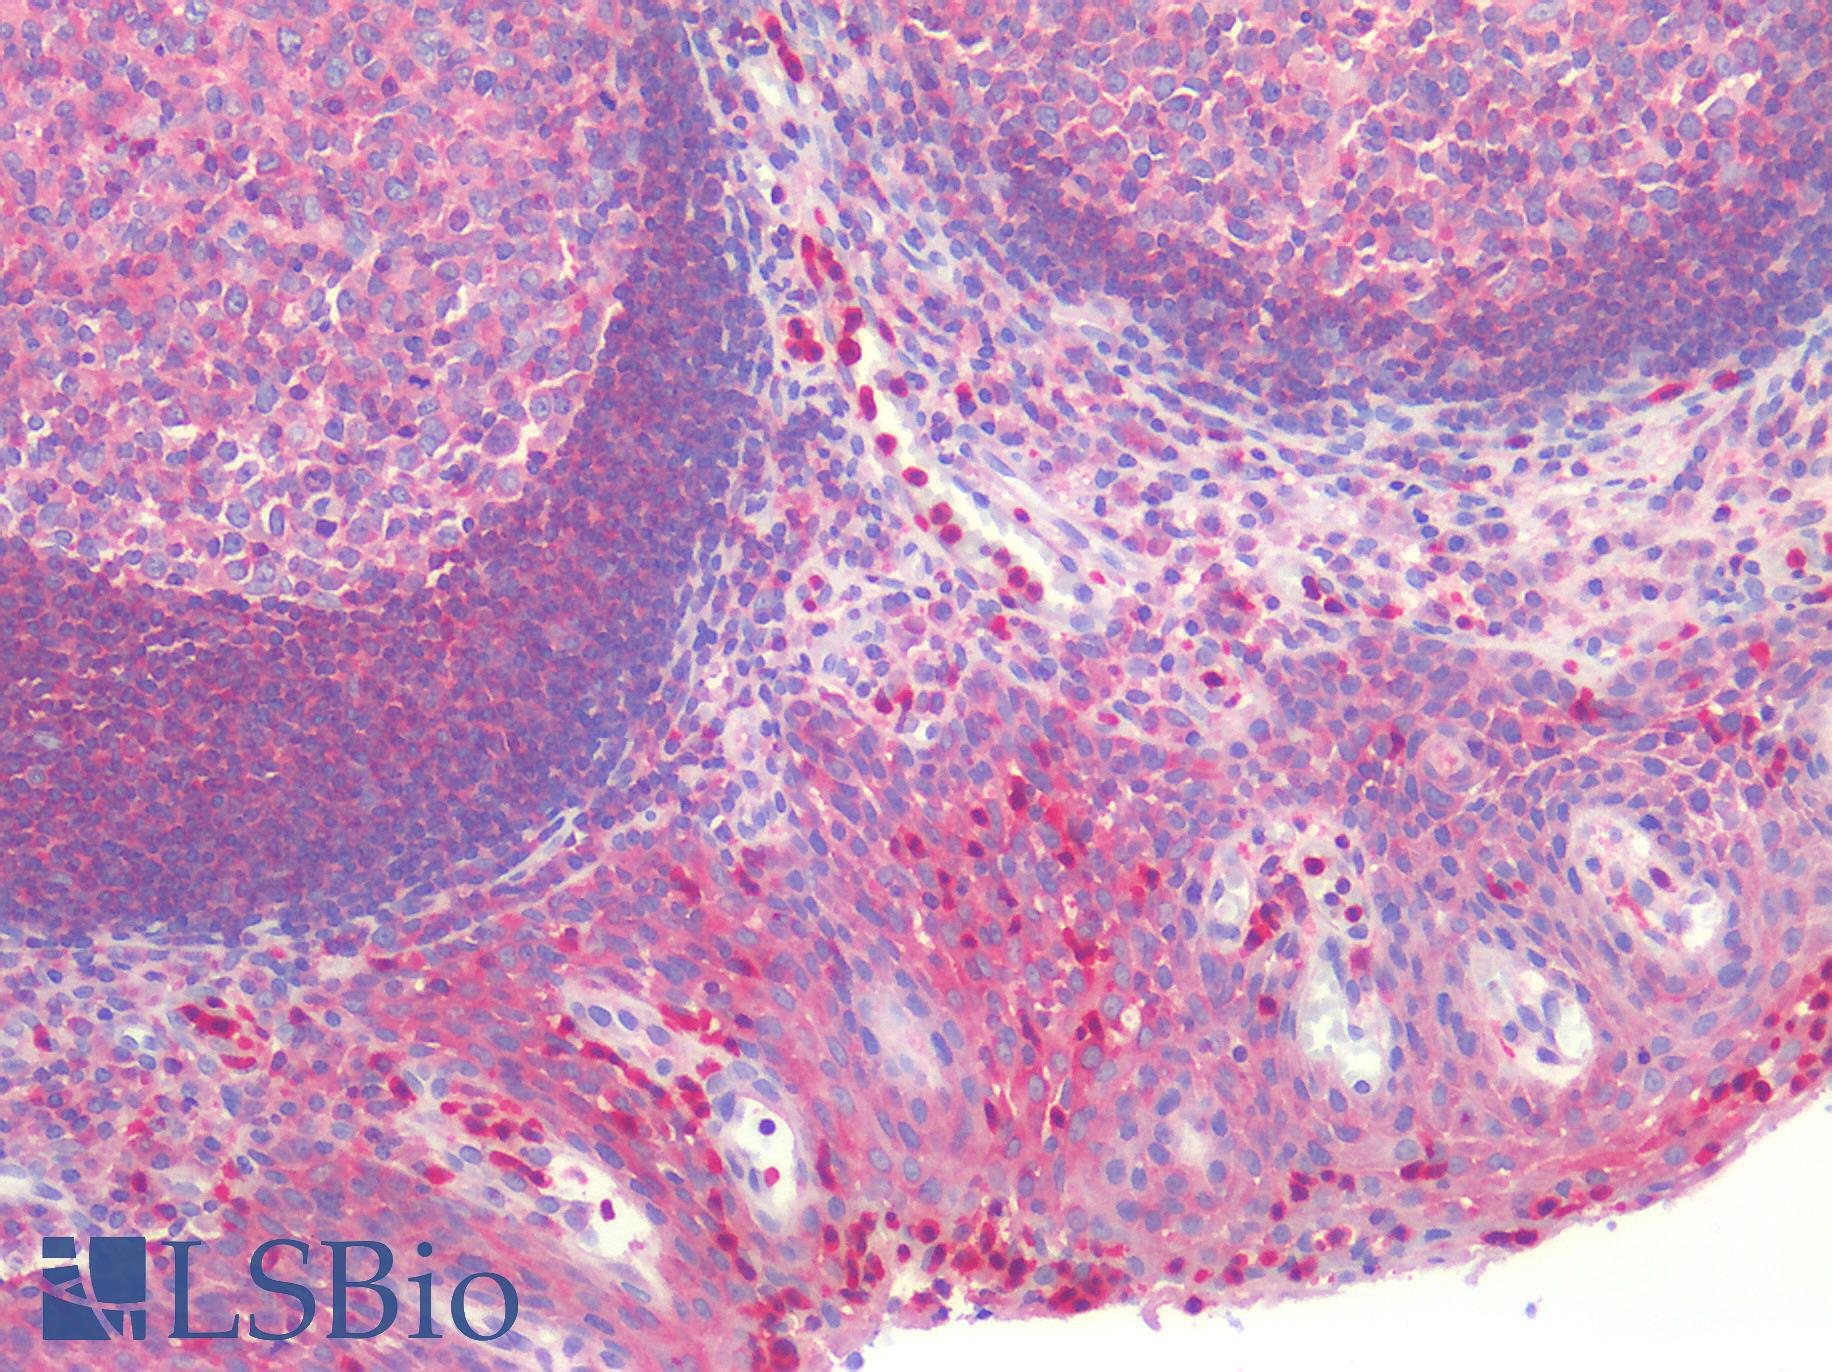 G6PD Antibody - Human Tonsil: Formalin-Fixed, Paraffin-Embedded (FFPE)